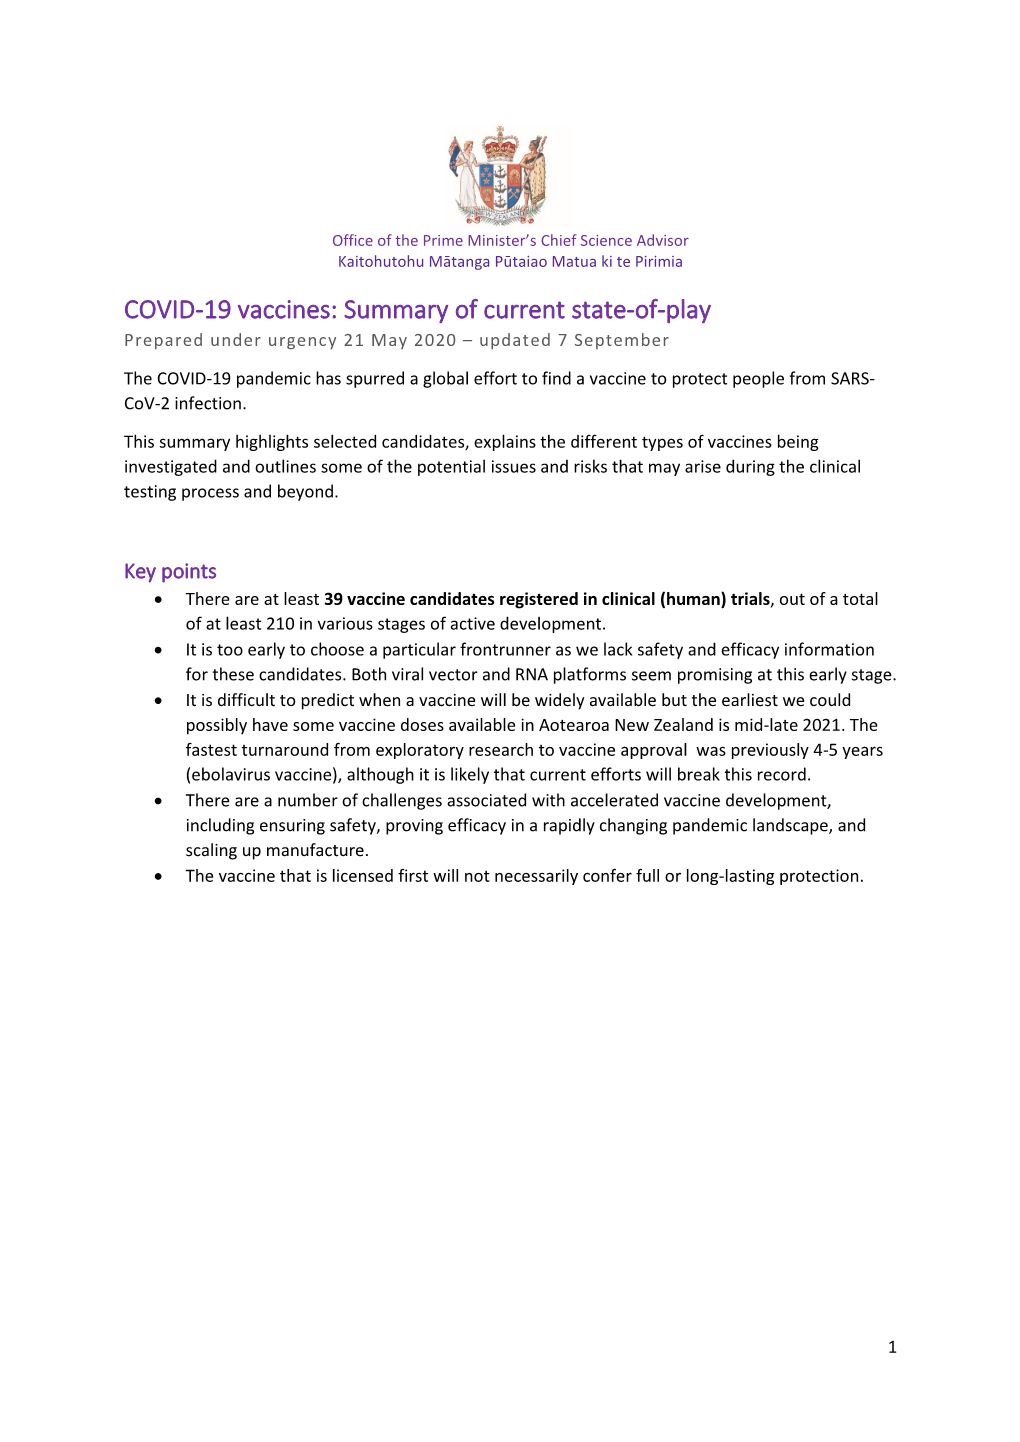 COVID-19 Vaccines: Summary of Current State-Of-Play Prepared Under Urgency 21 May 2020 – Updated 7 September